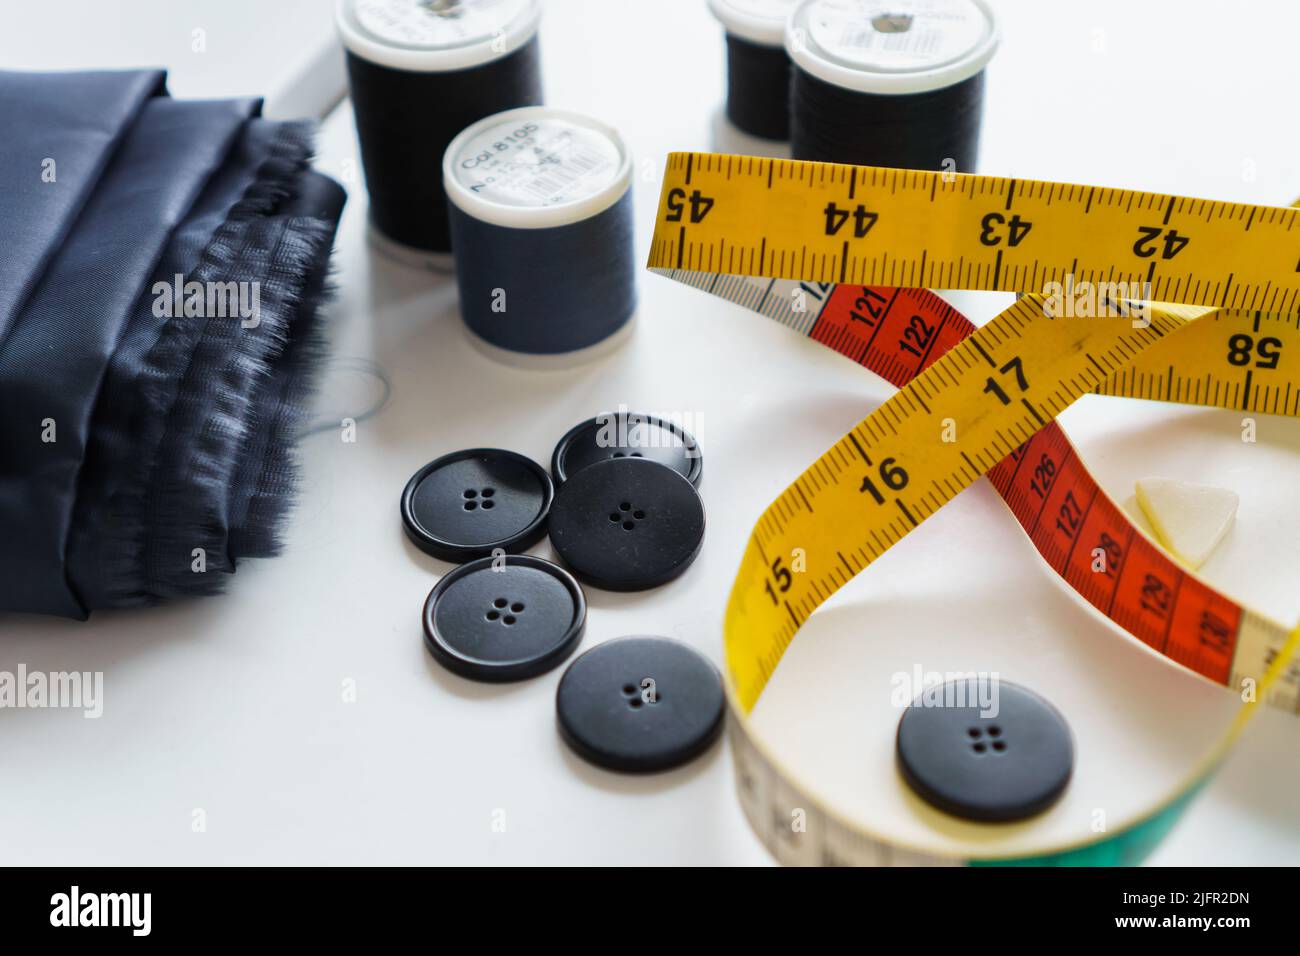 https://c8.alamy.com/comp/2JFR2DN/sewing-items-and-seamstress-tools-tailoring-measuring-tape-rulers-pins-buttons-fabric-2JFR2DN.jpg